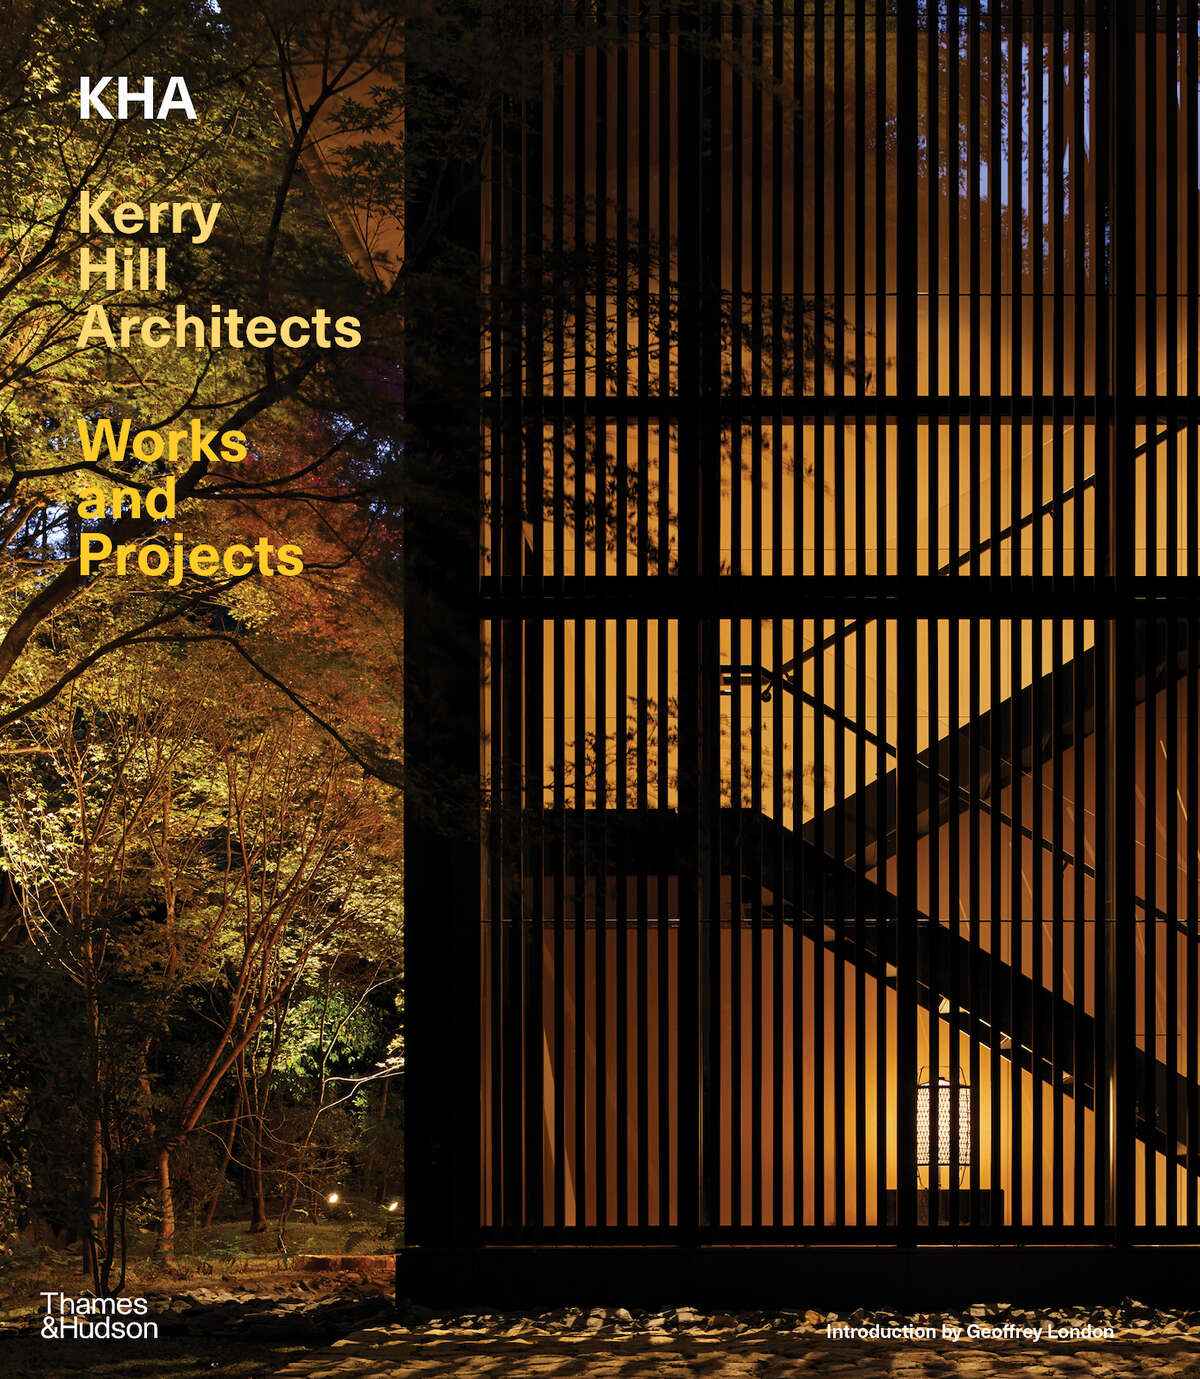 "Kerry Hill Architects: Works and Projects" published by Thames & Hudson